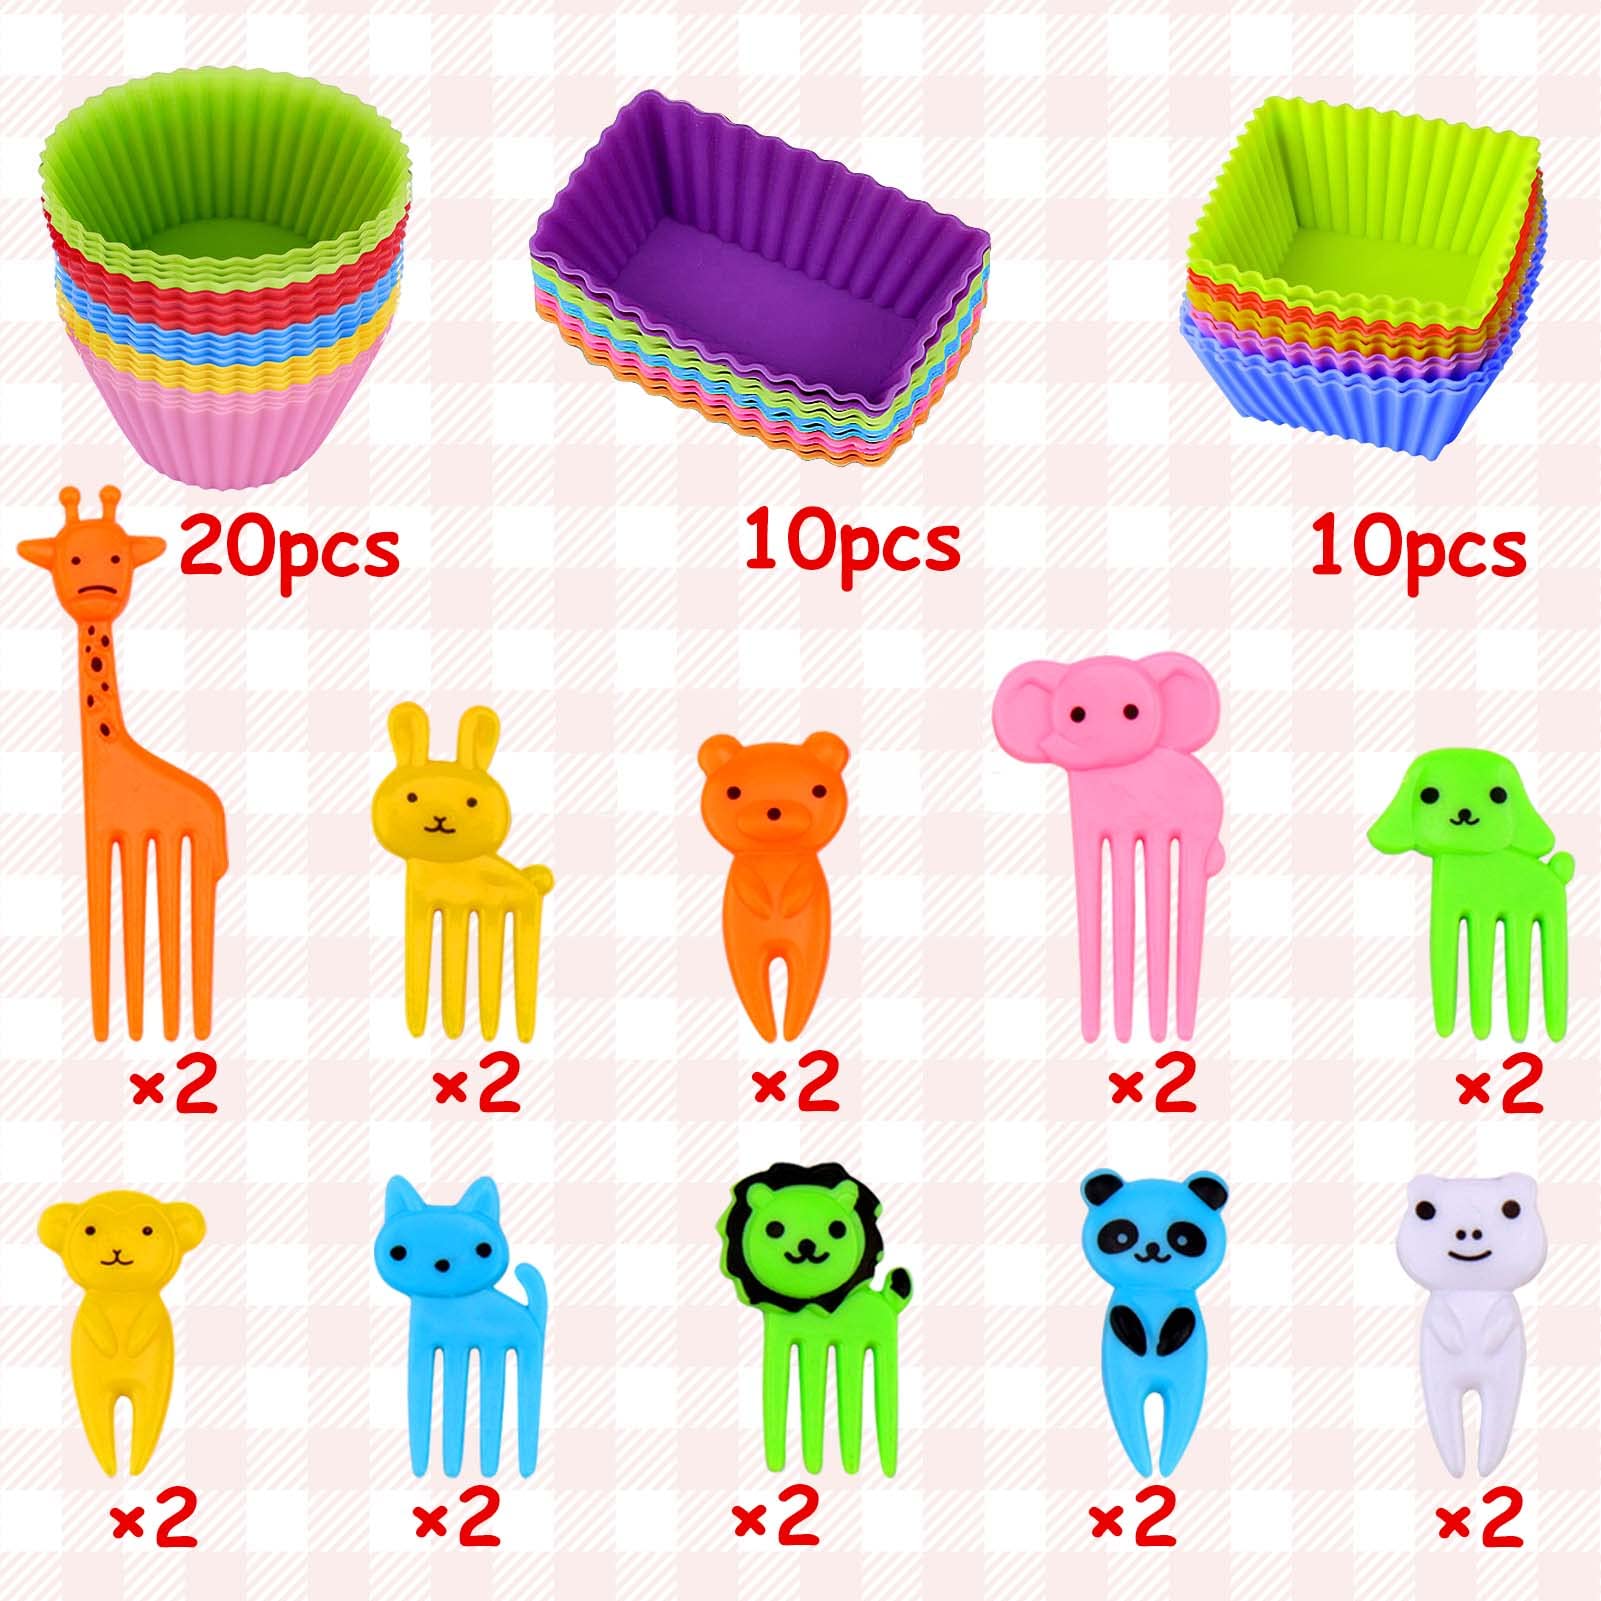 XANGNIER 60 PCS Bento Box Lunch Box Kit, Accessories with Silicone Dividers, Animal Food Picks for Kids,BPA Free